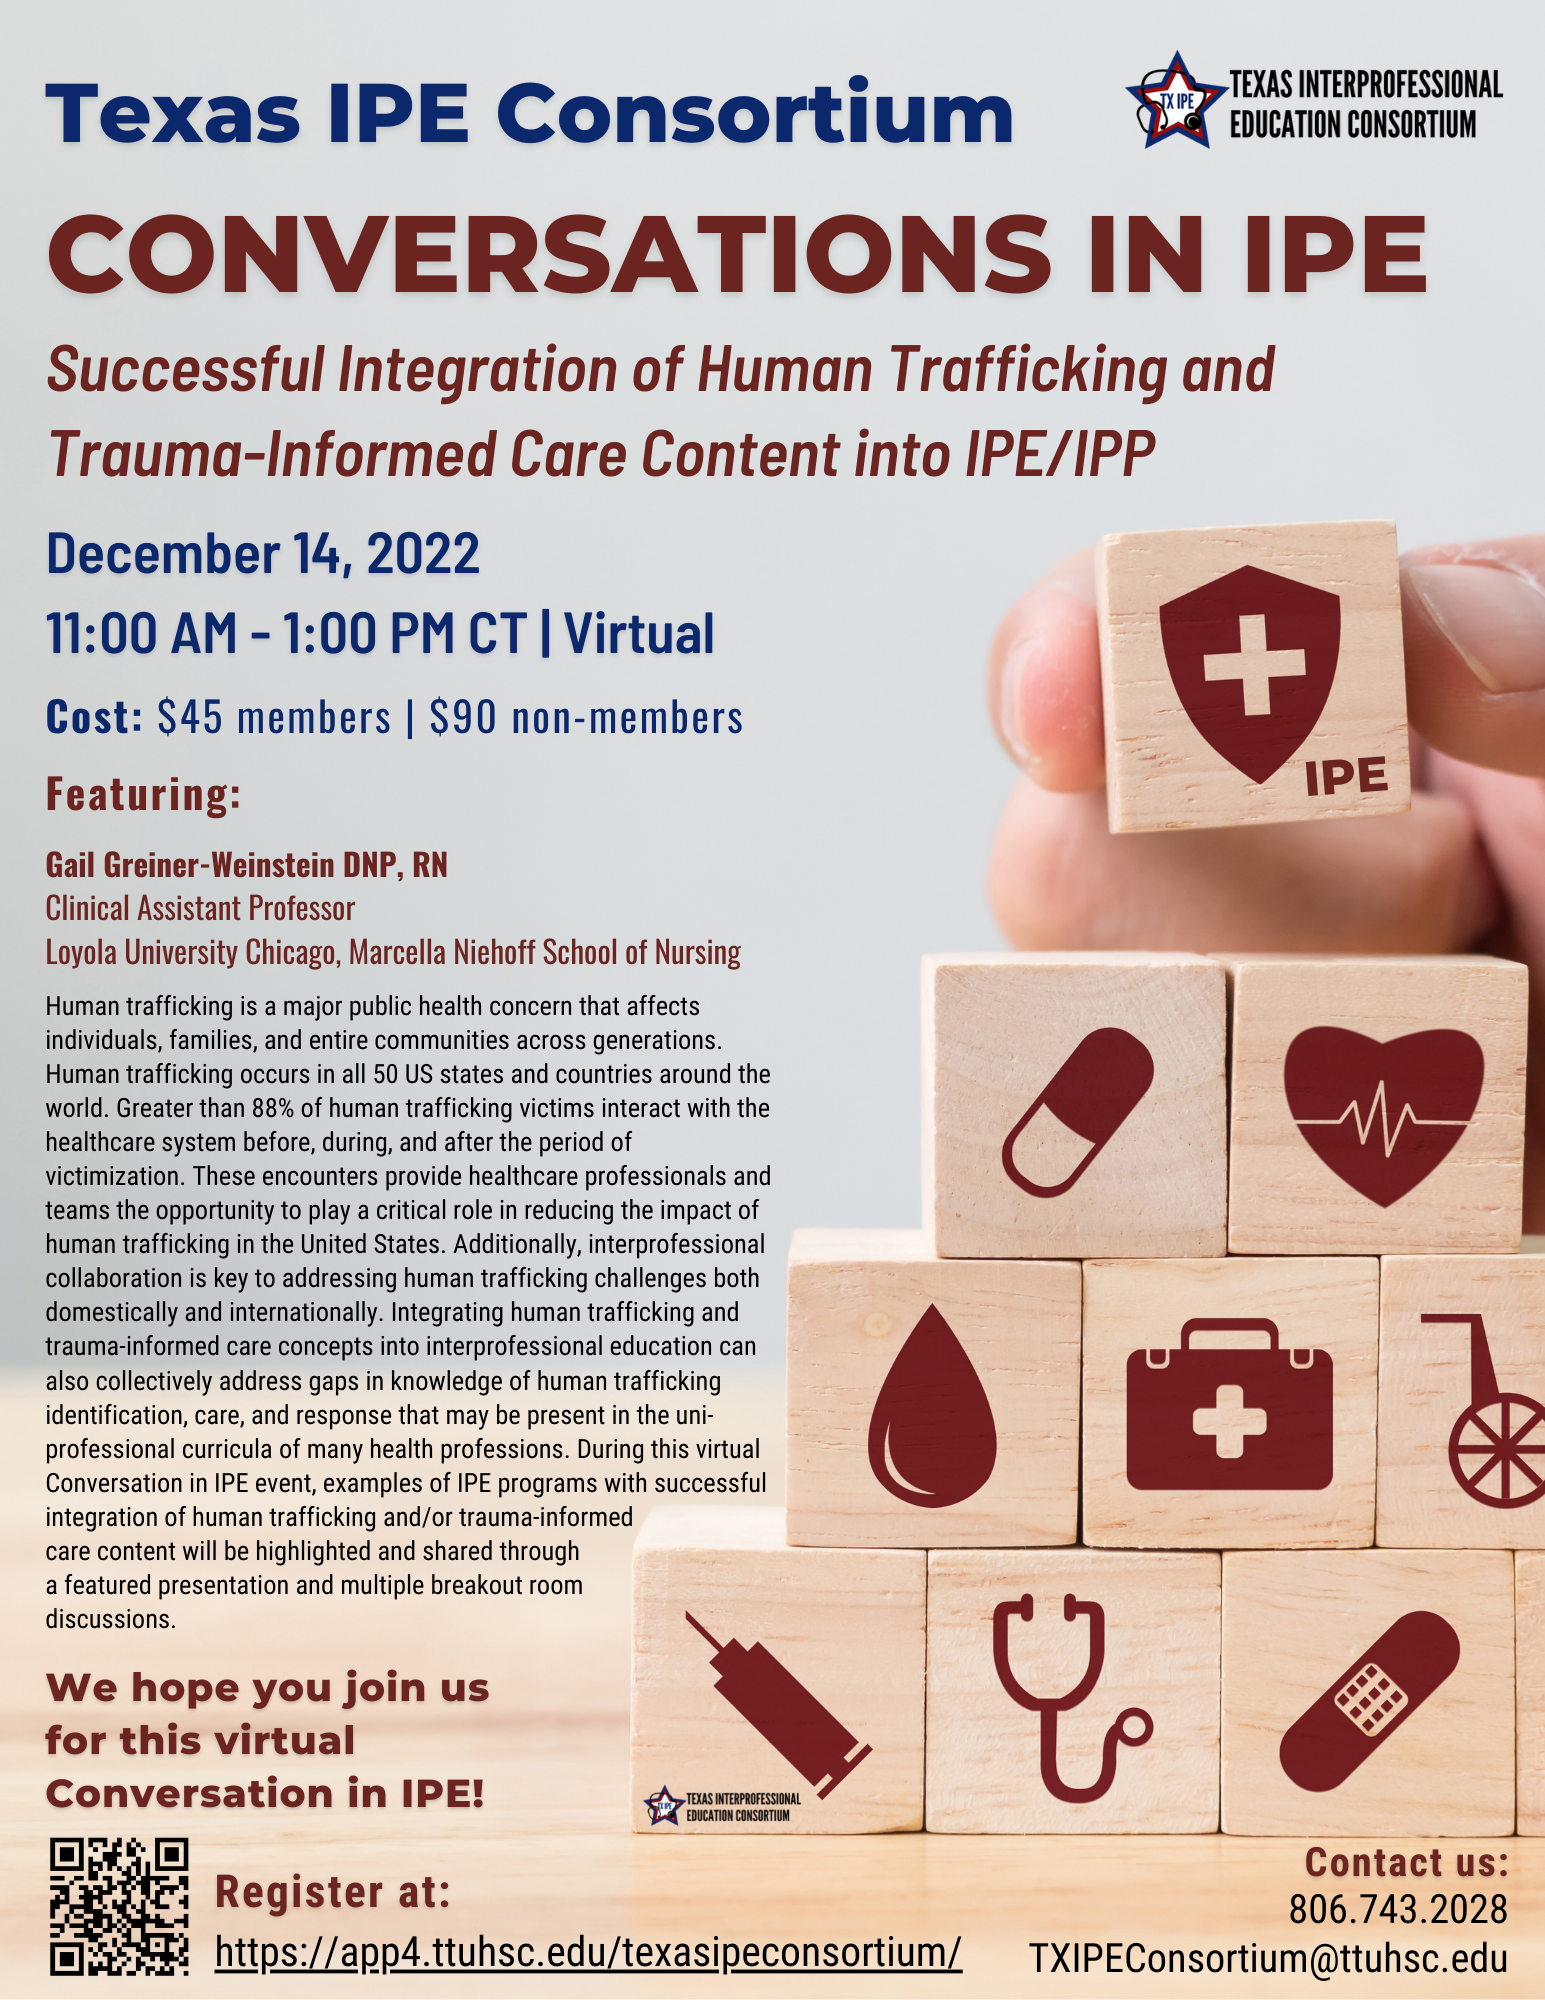 Conversations in IPE Human Trafficking and Trauma-Informed Care December 14, 2022 11:00AM - 1PM CT, virtual 